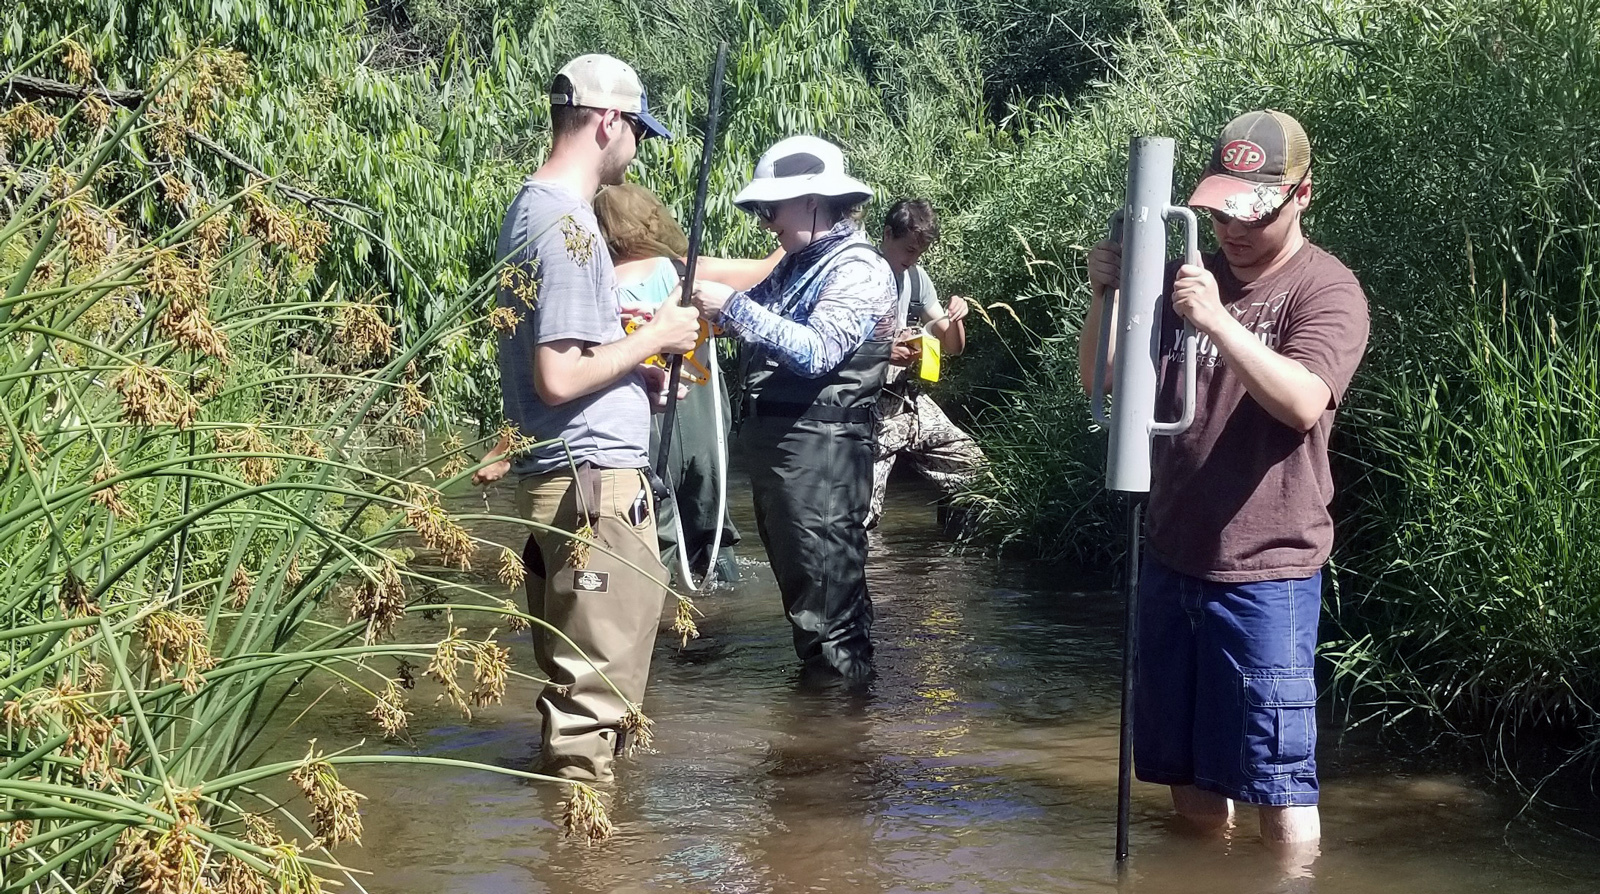 Students of the Field Methods of Hydrogeology course install stream-bed piezometers at the Robert P. Harrison Field Station. Piezometers allow hydrogeologists to measure how much water seeps through the bottom of the stream into the groundwater below it.